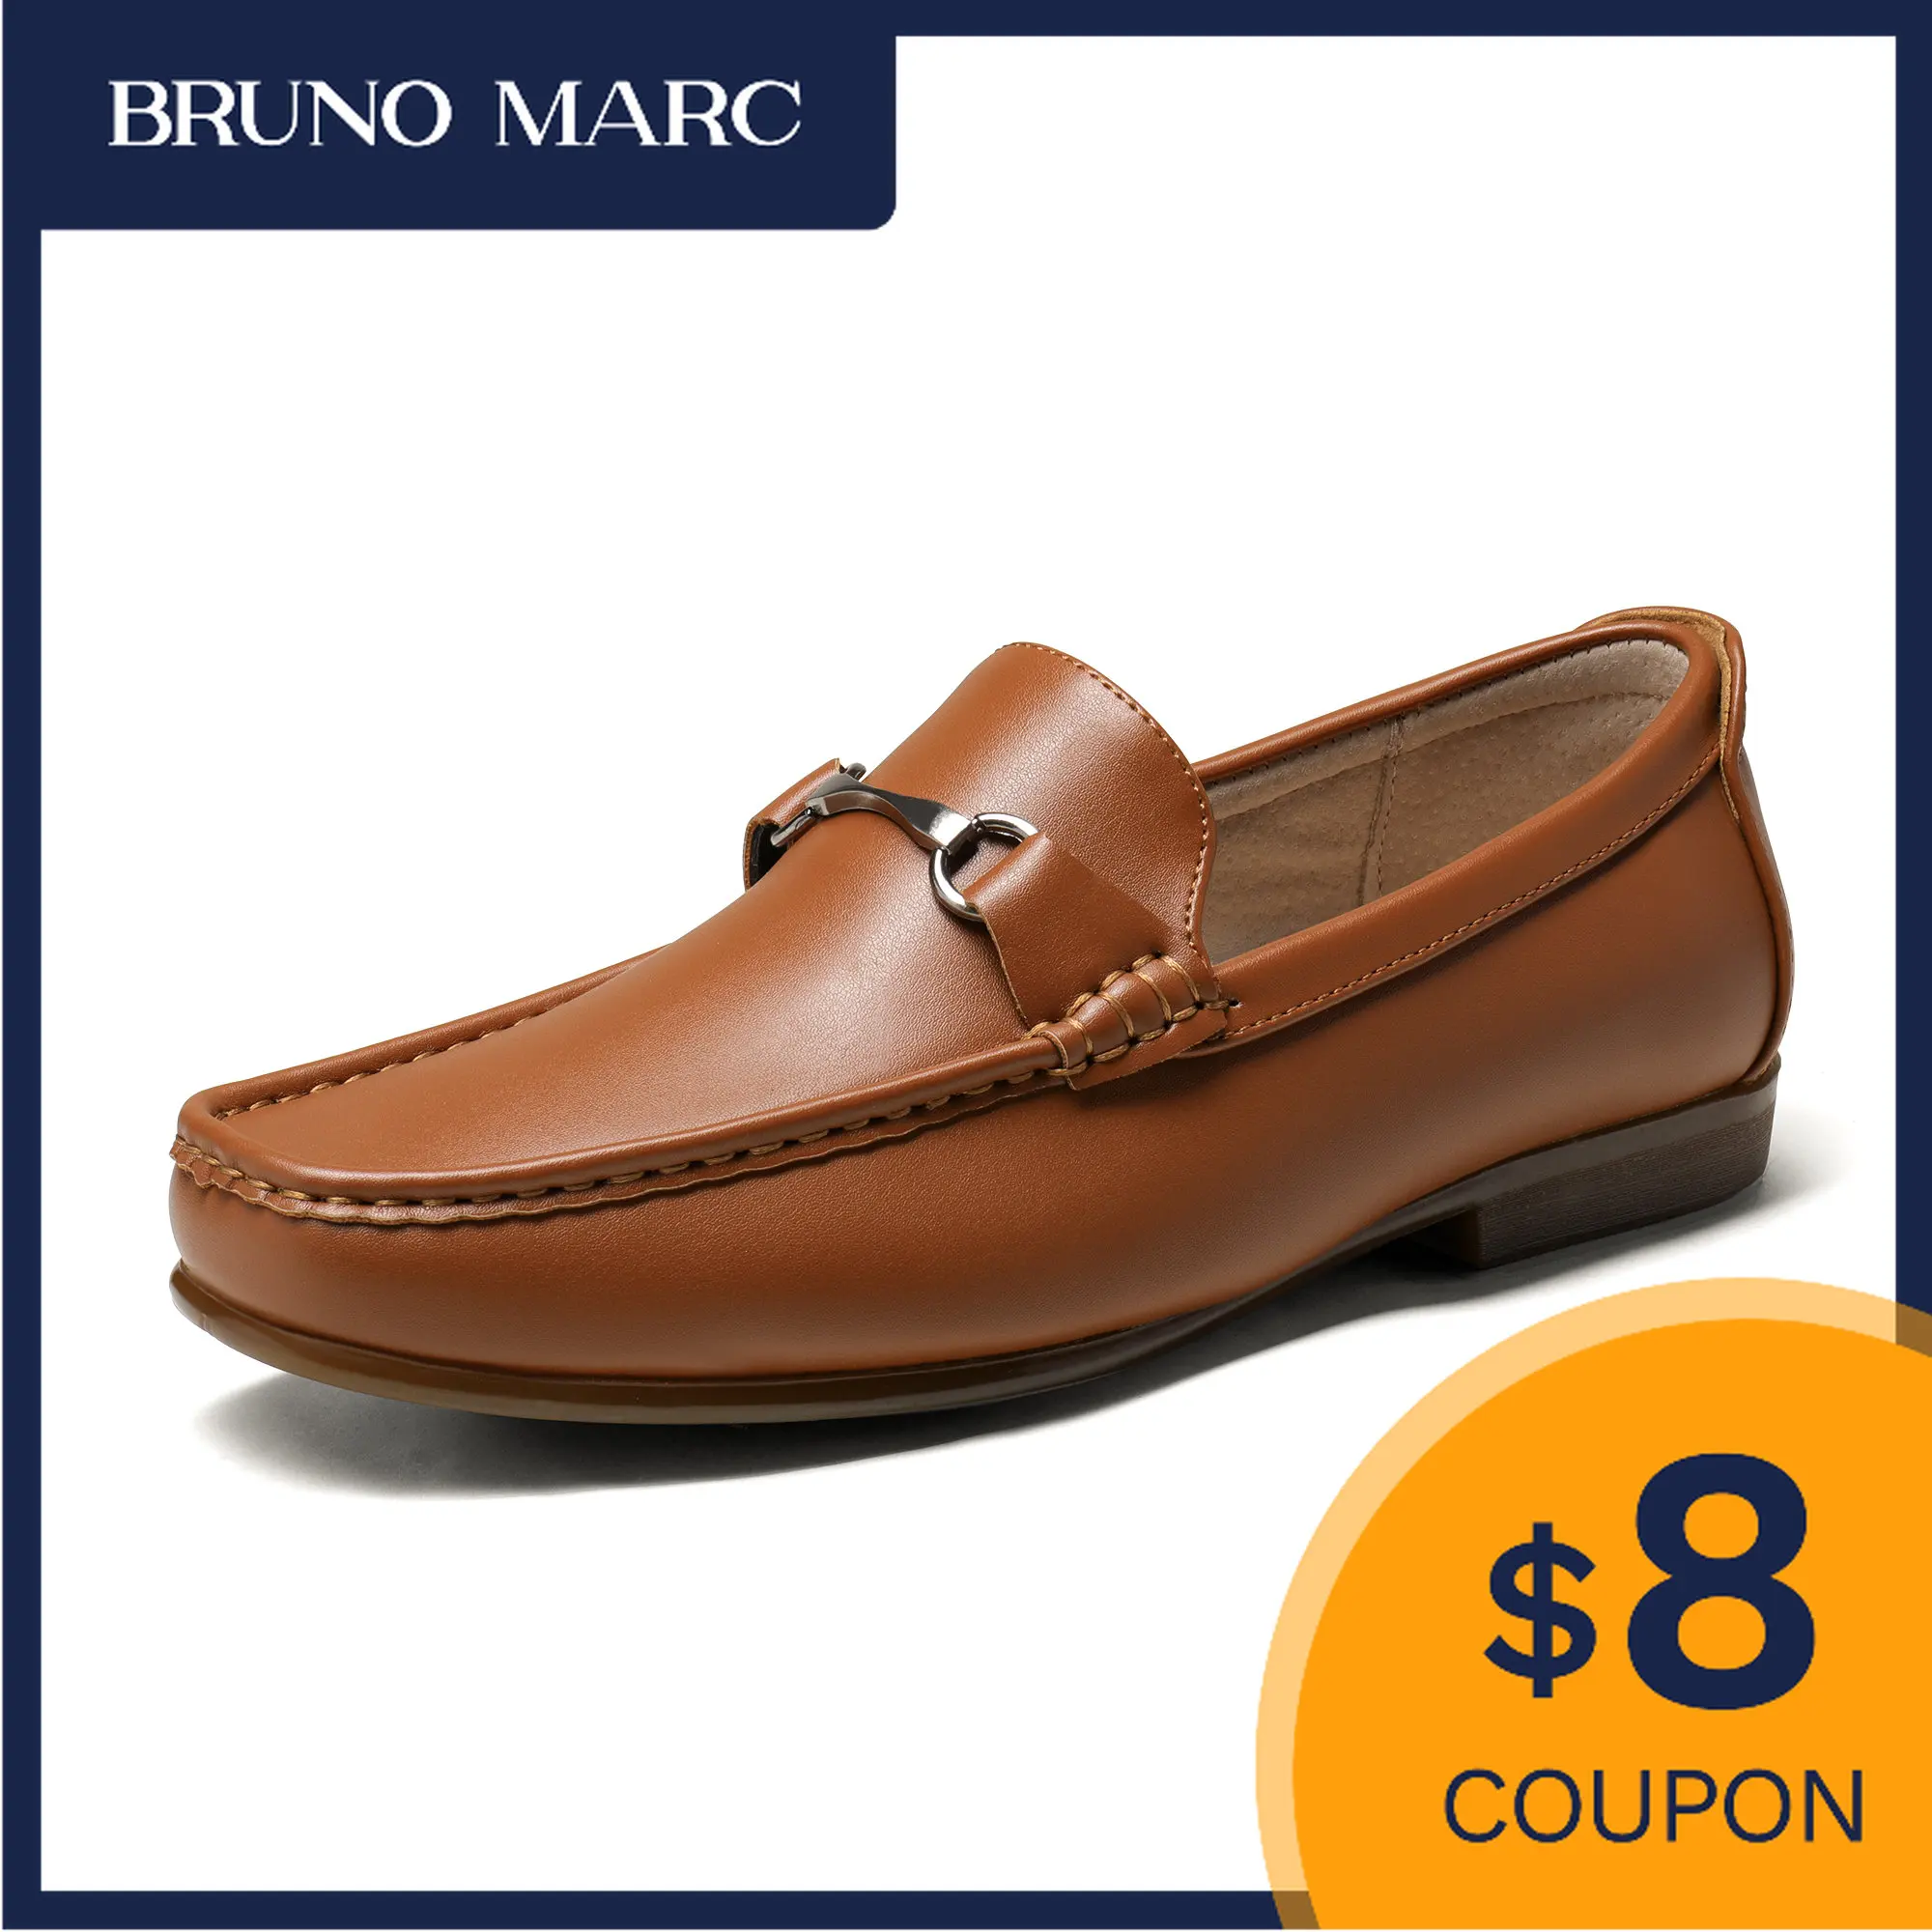 

Bruno Marc Men's Loafers Formal Driving Loafer for Men Slip on Dress Shoes Flats Casual Comfy Male Leather Loafers Luxury Shoes